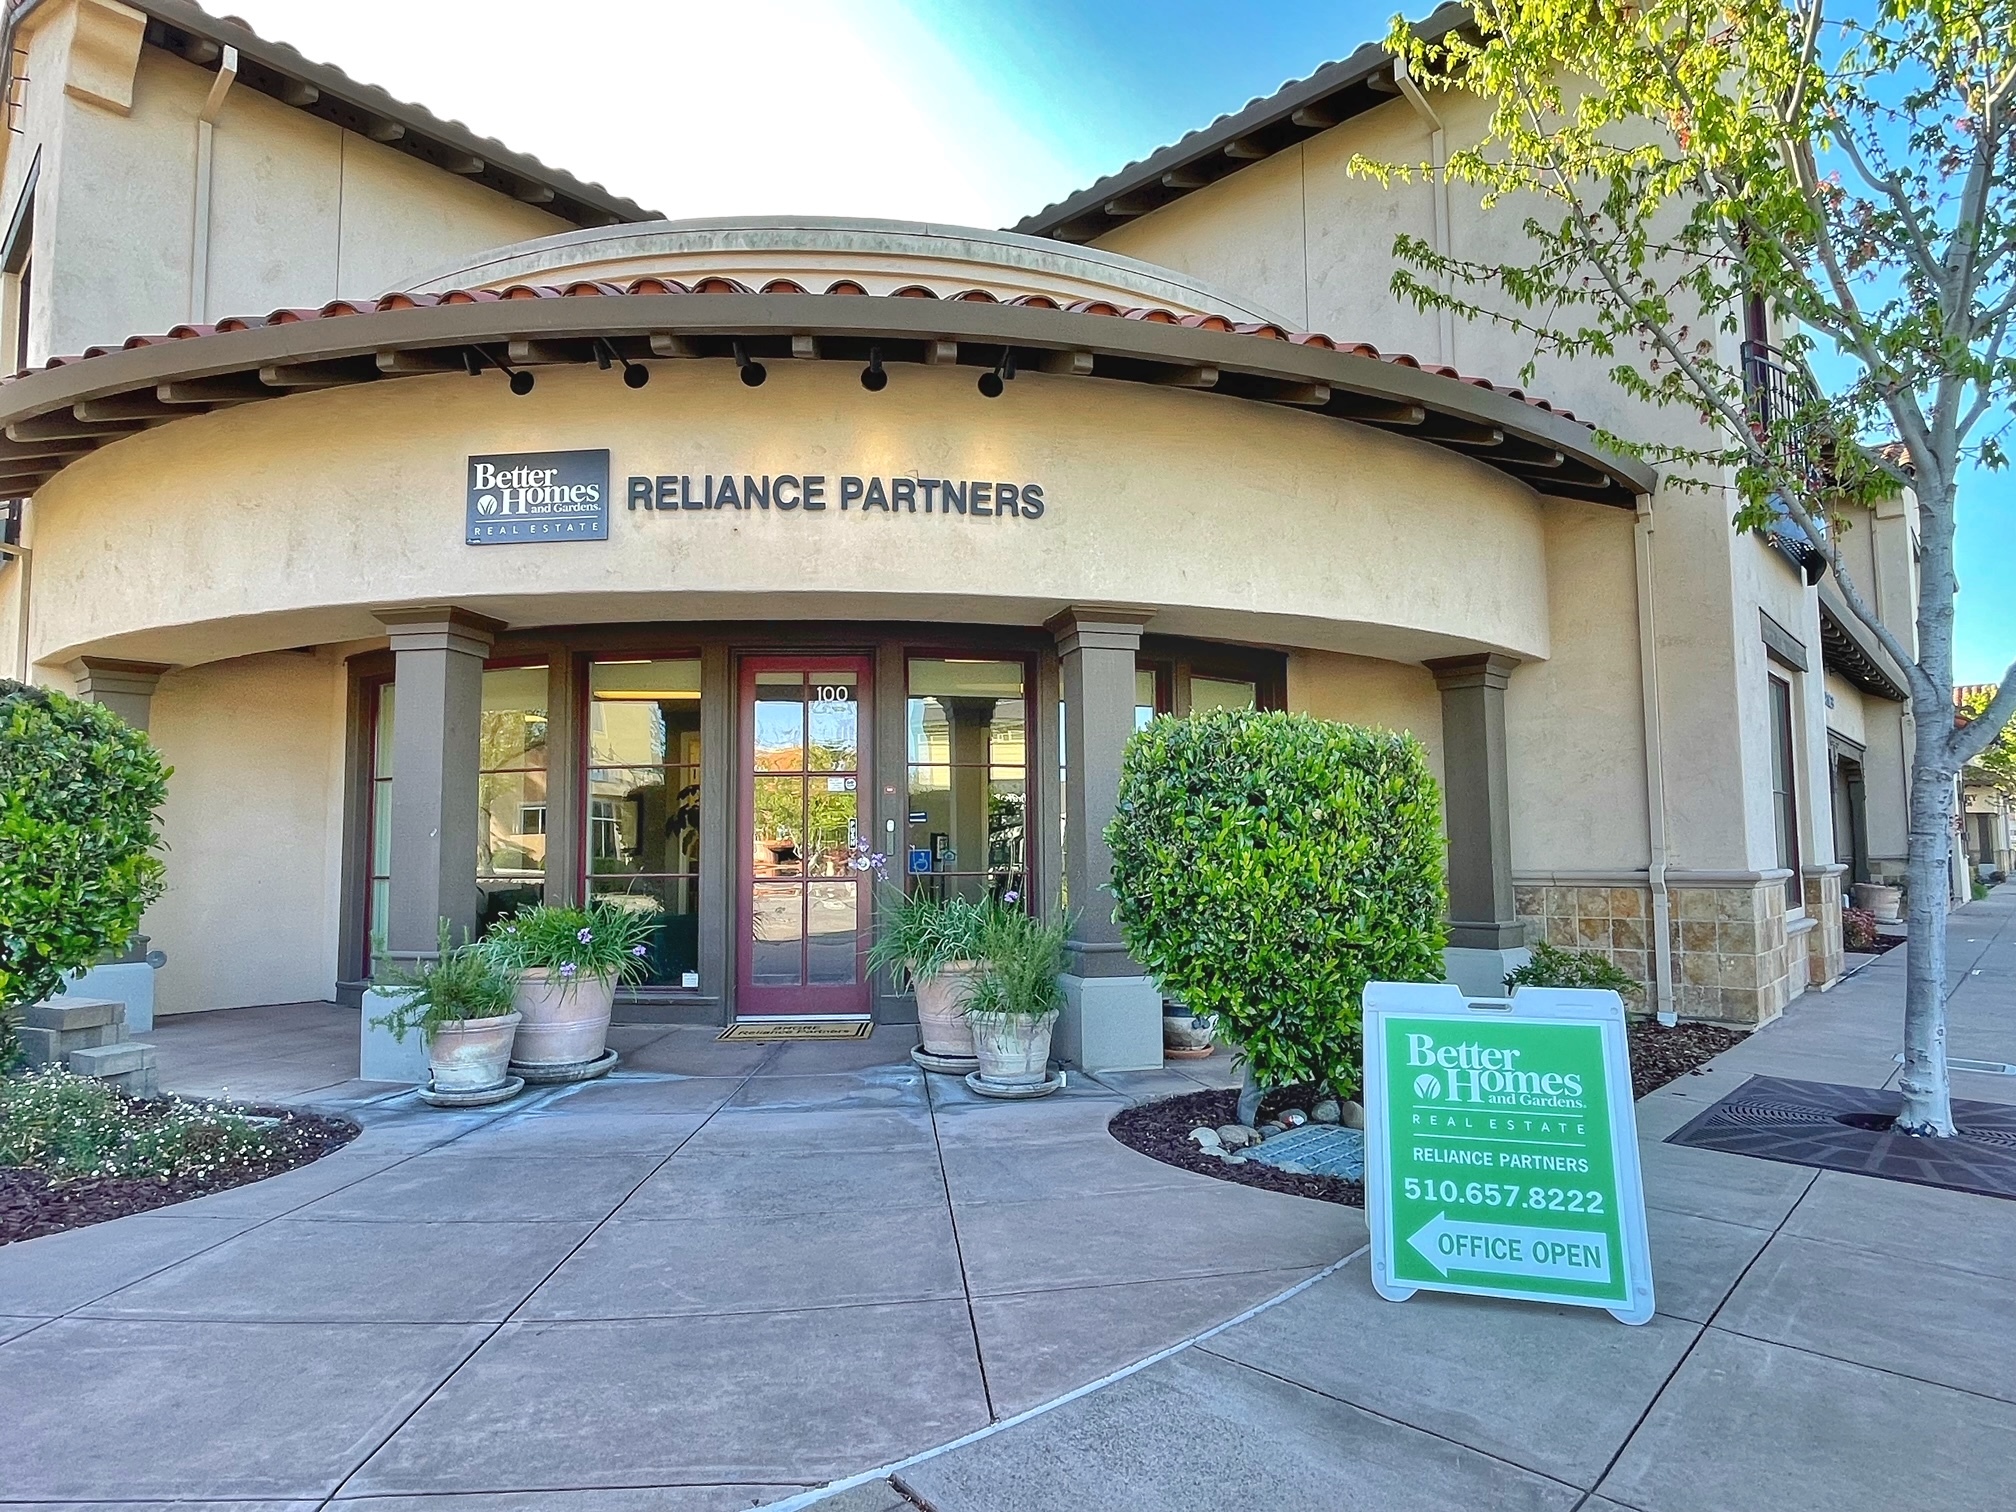 Fremont,Fremont,Better Homes and Gardens Reliance Partners